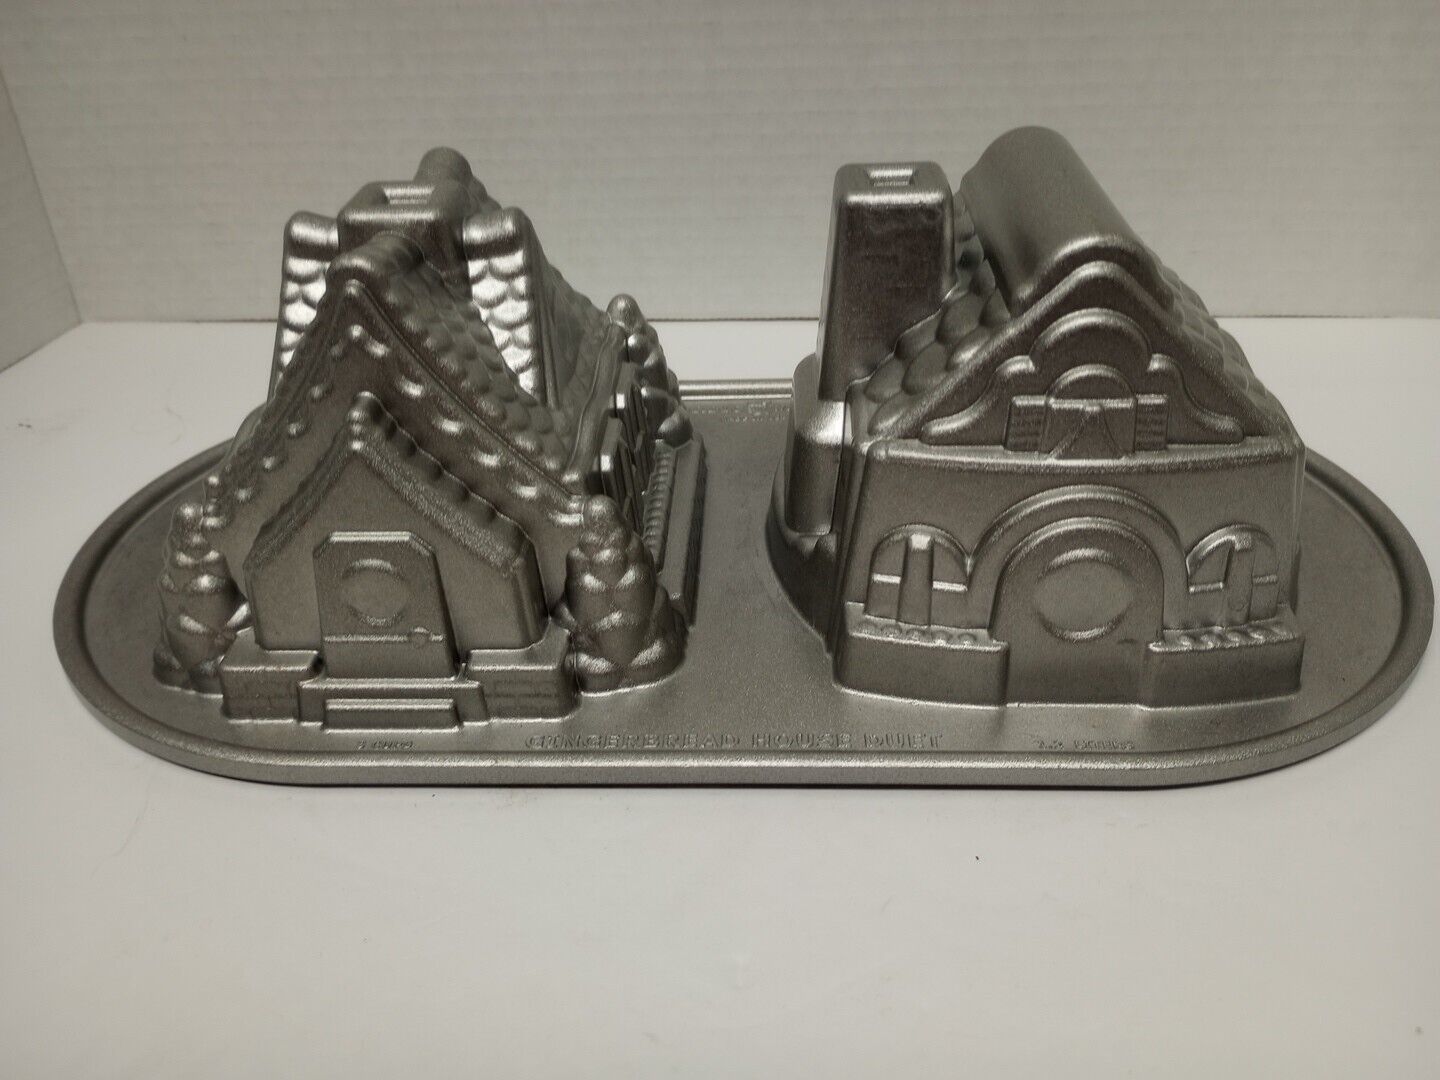 Nordic Ware GINGERBREAD HOUSE DUET Pan 3D Cast Aluminum 2 Sections 5 Cups 